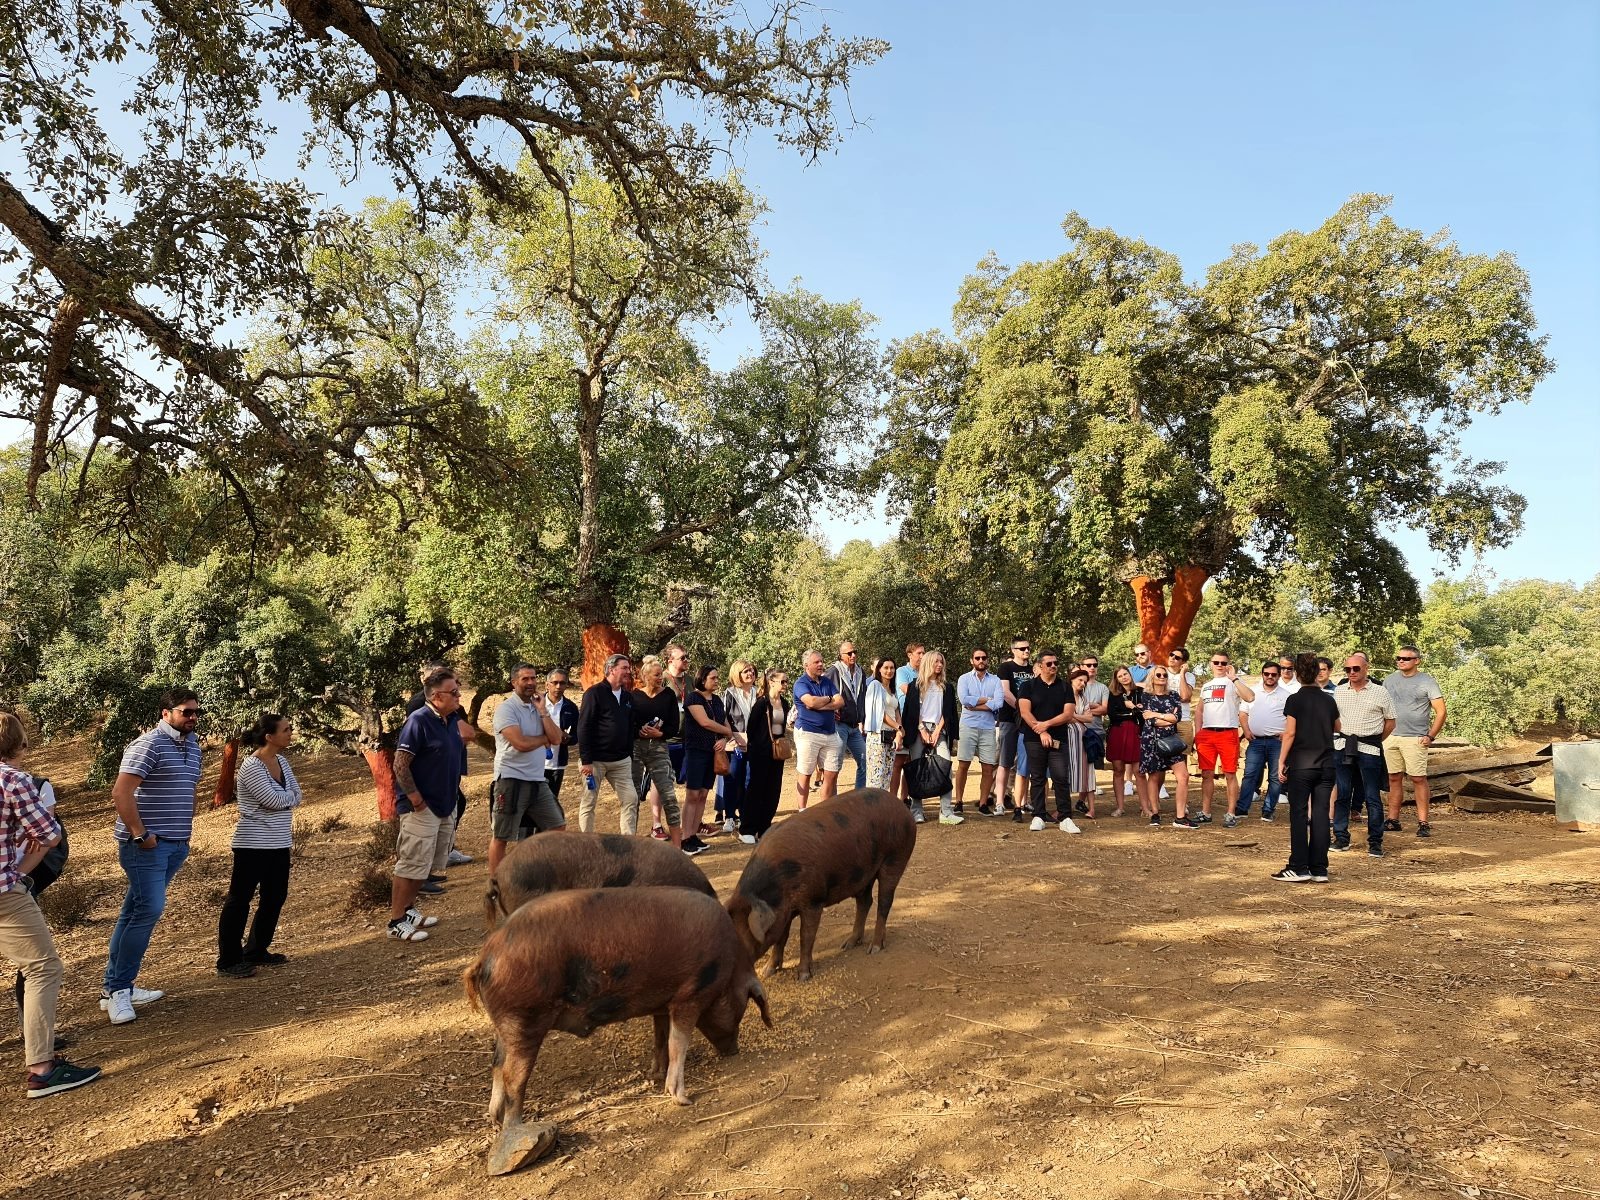  Group of tourists in the pasture with the pigs.